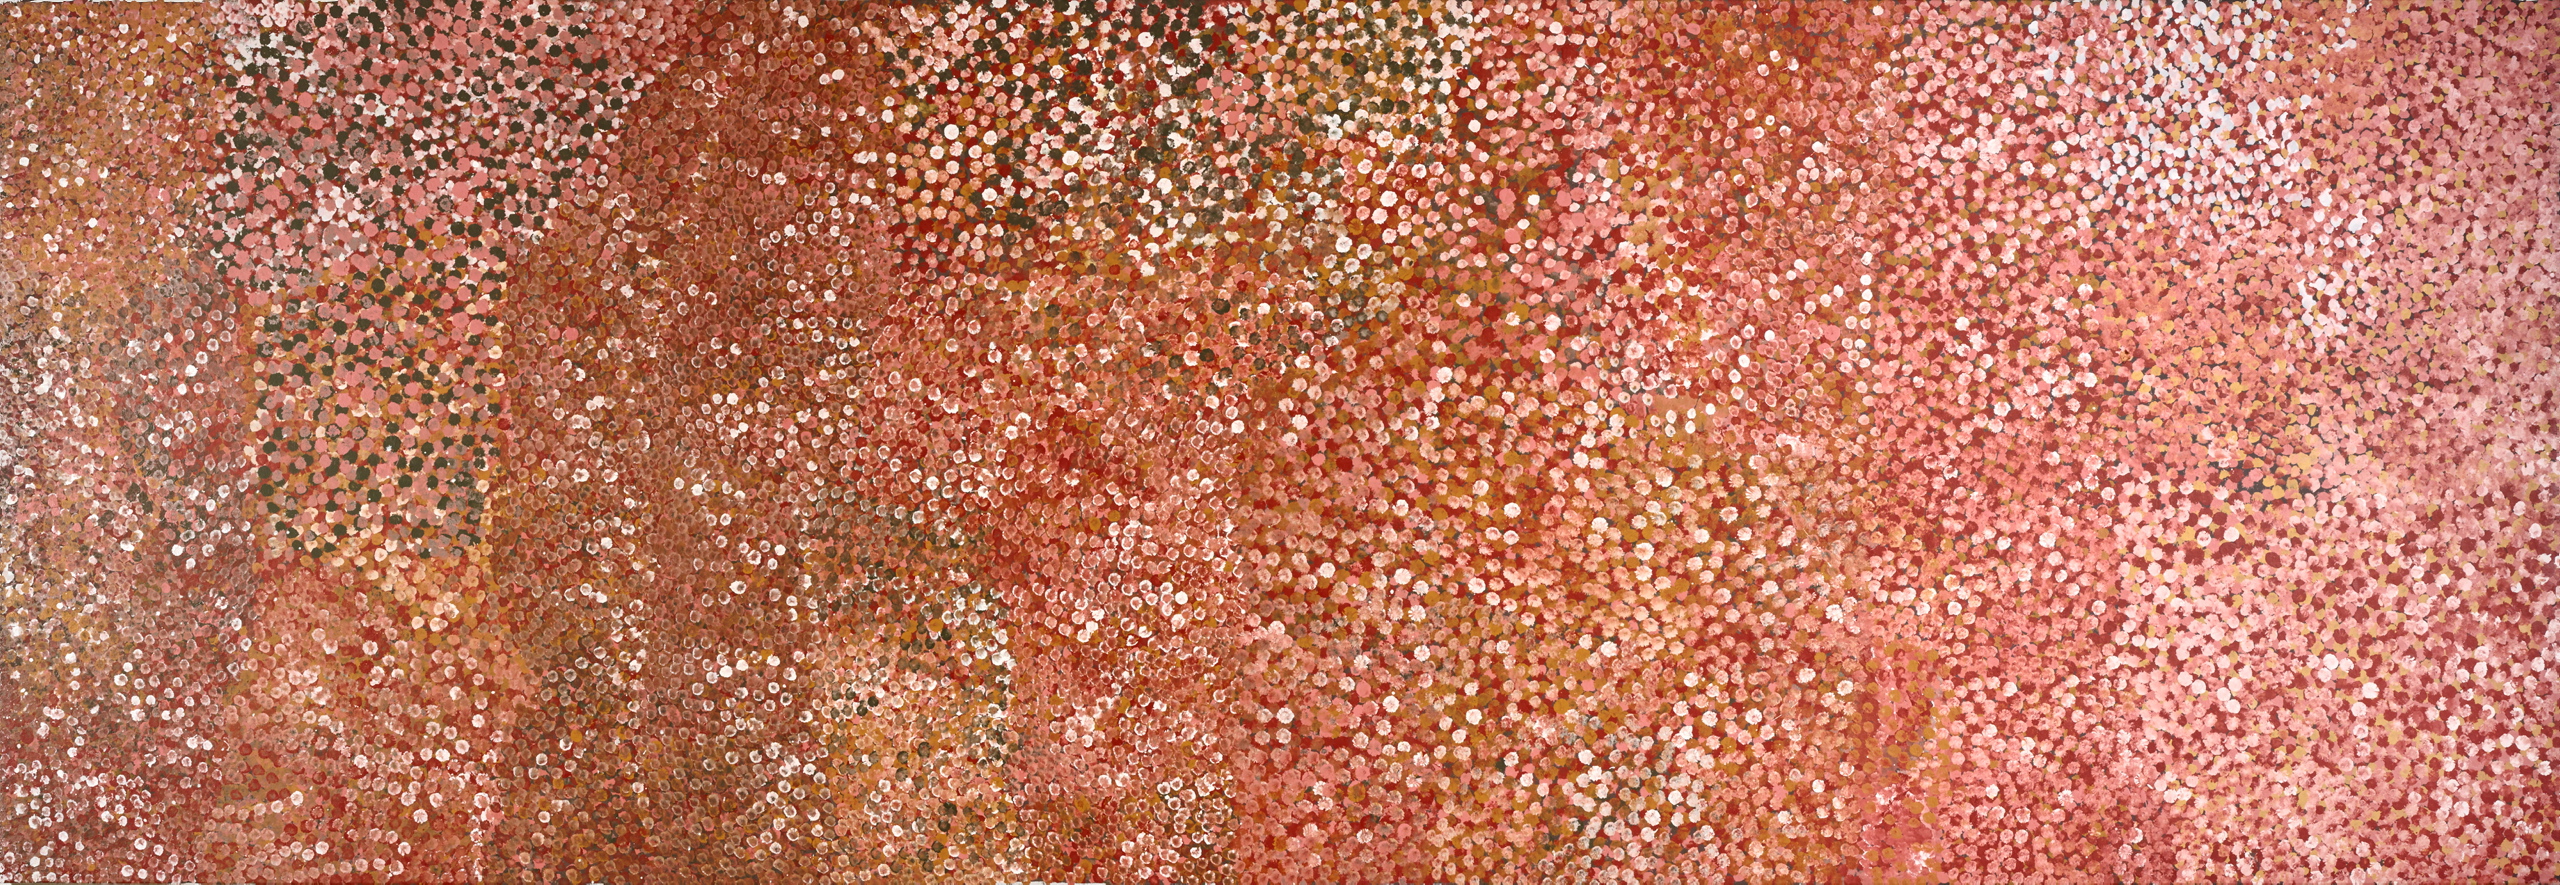 A vast rectangular canvas featuring a vivid traditional Aboriginal dot painting in ochre, red, yellow, brown and white paints.